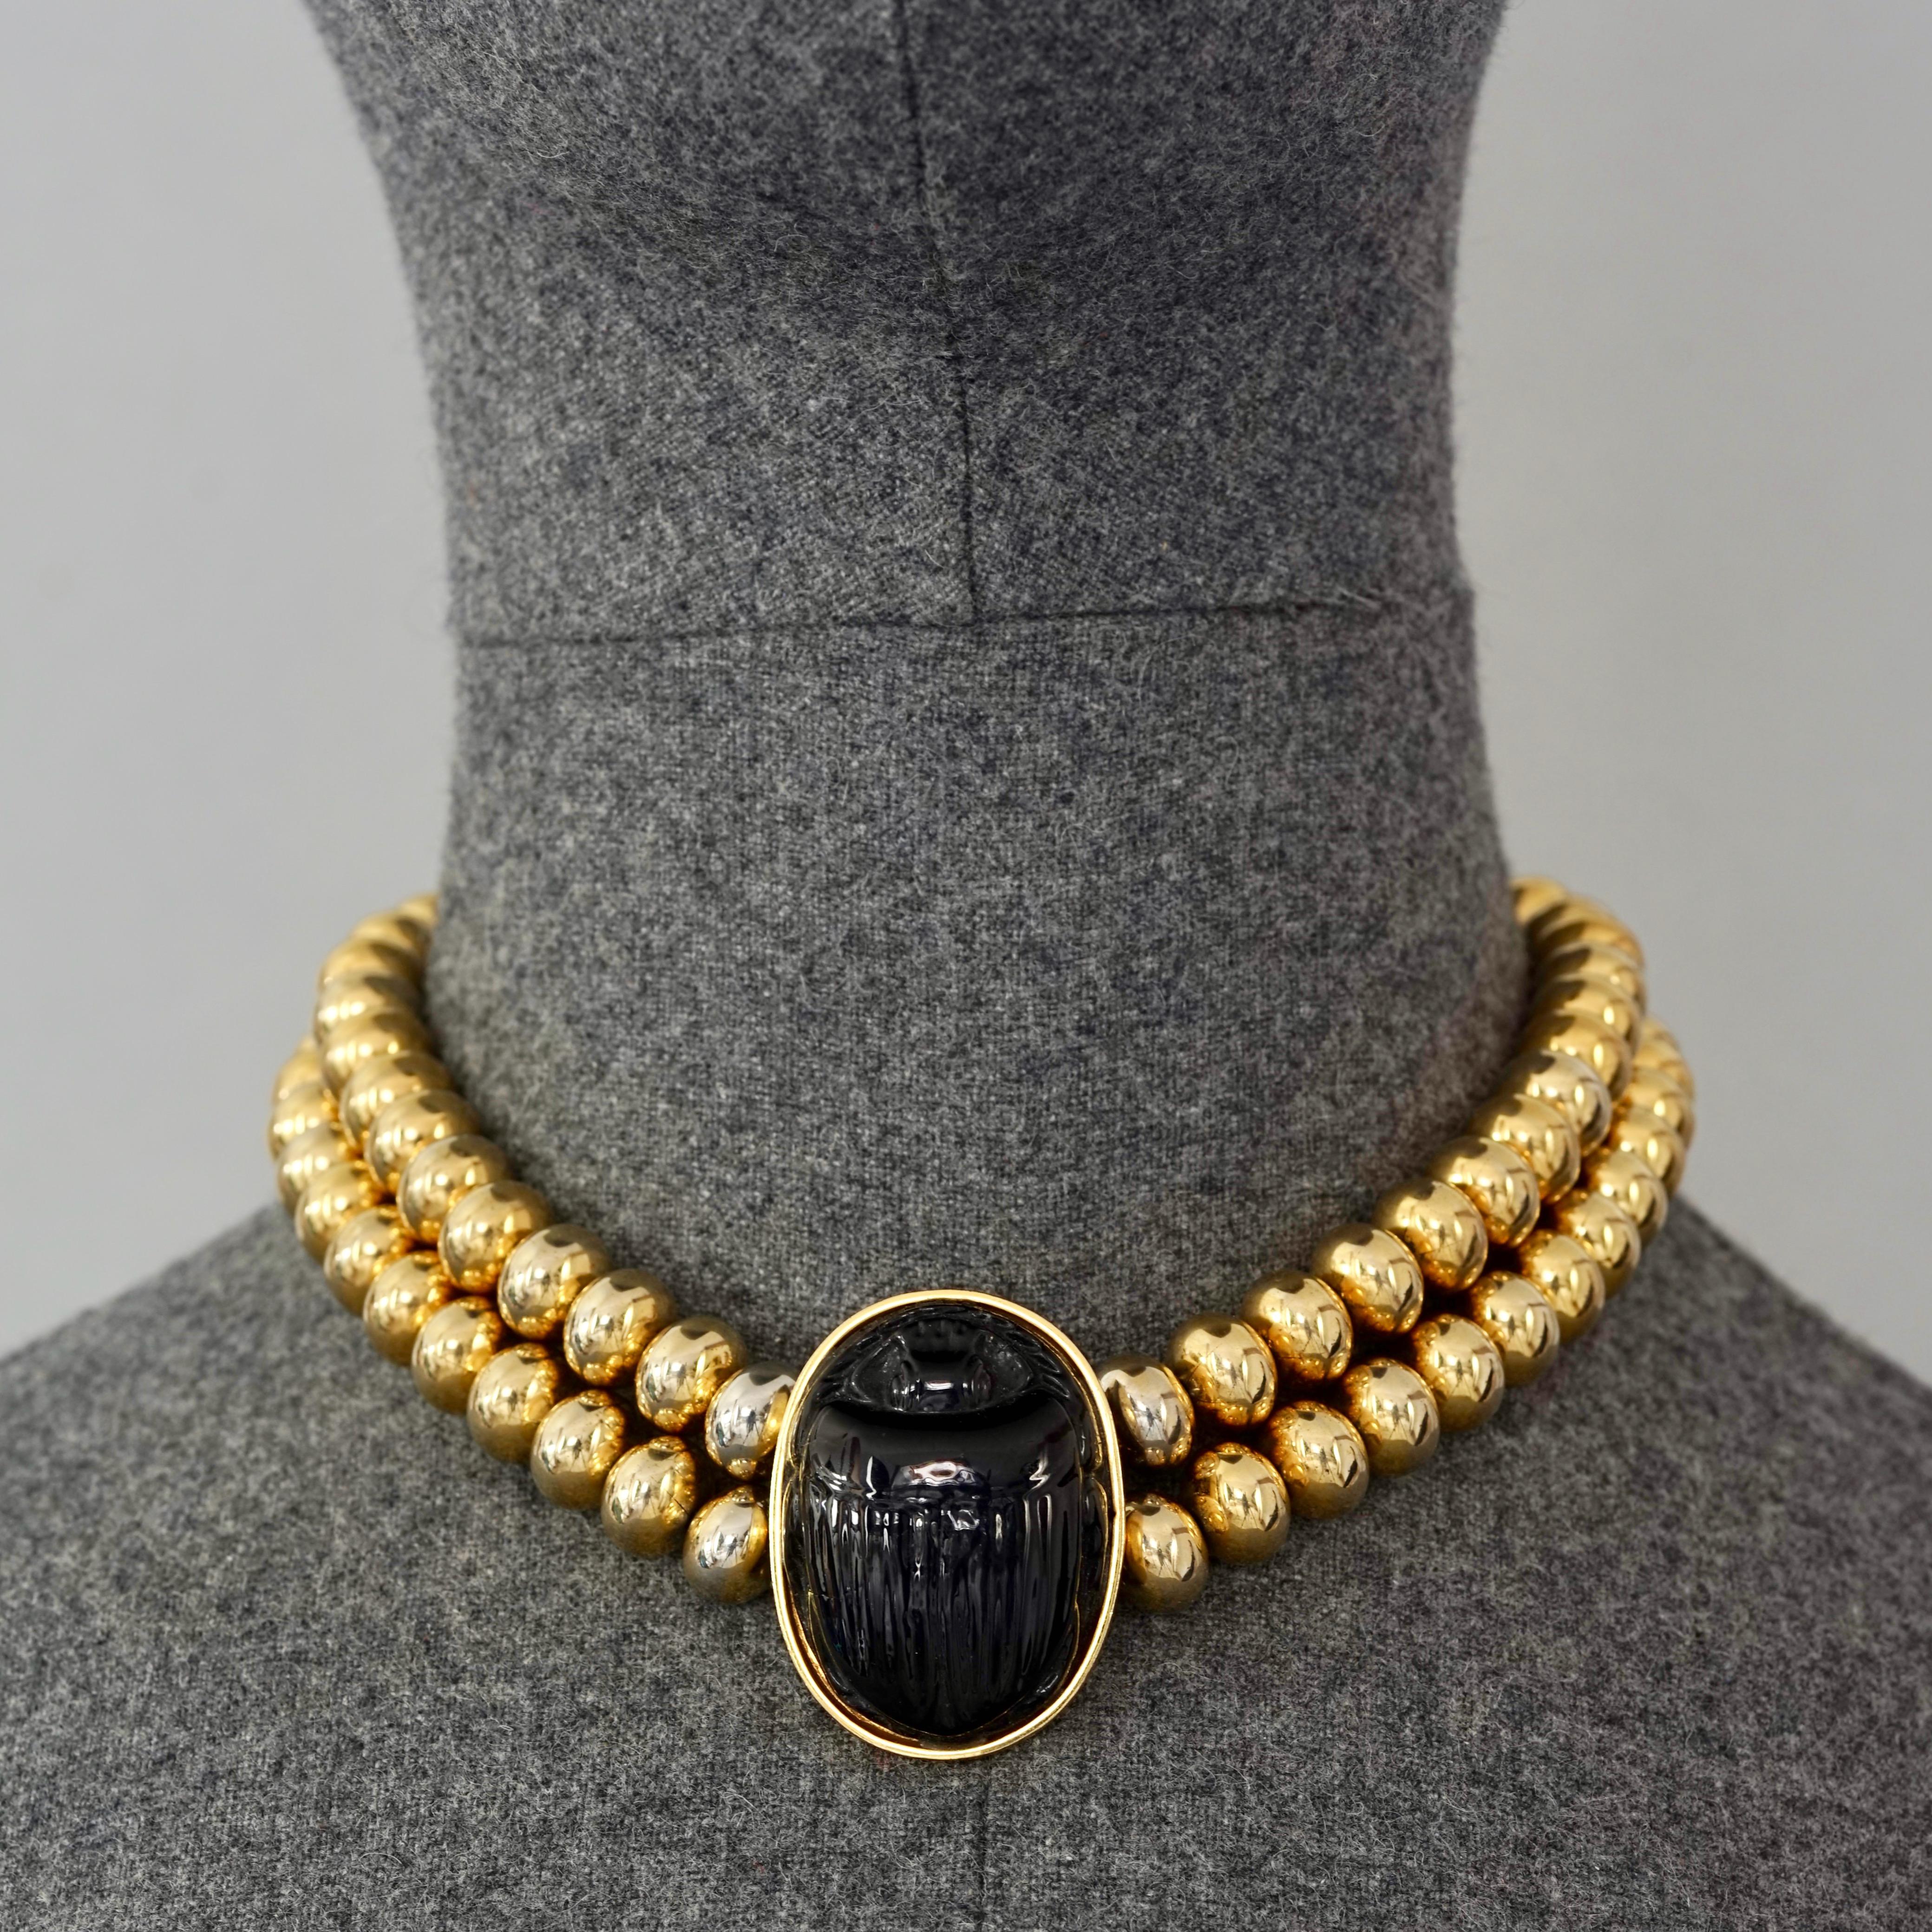 Vintage CHANEL Gripoix Scarab Egyptian Revival Double Strand Necklace

Measurements:
Height: 1.57 inches  (4 cm)
Wearable Length: 14.76 inches (37.5 cm)

Features:
- 100% Authentic CHANEL.
- Black Gripoix/ pate de verre scarab with double ball chain